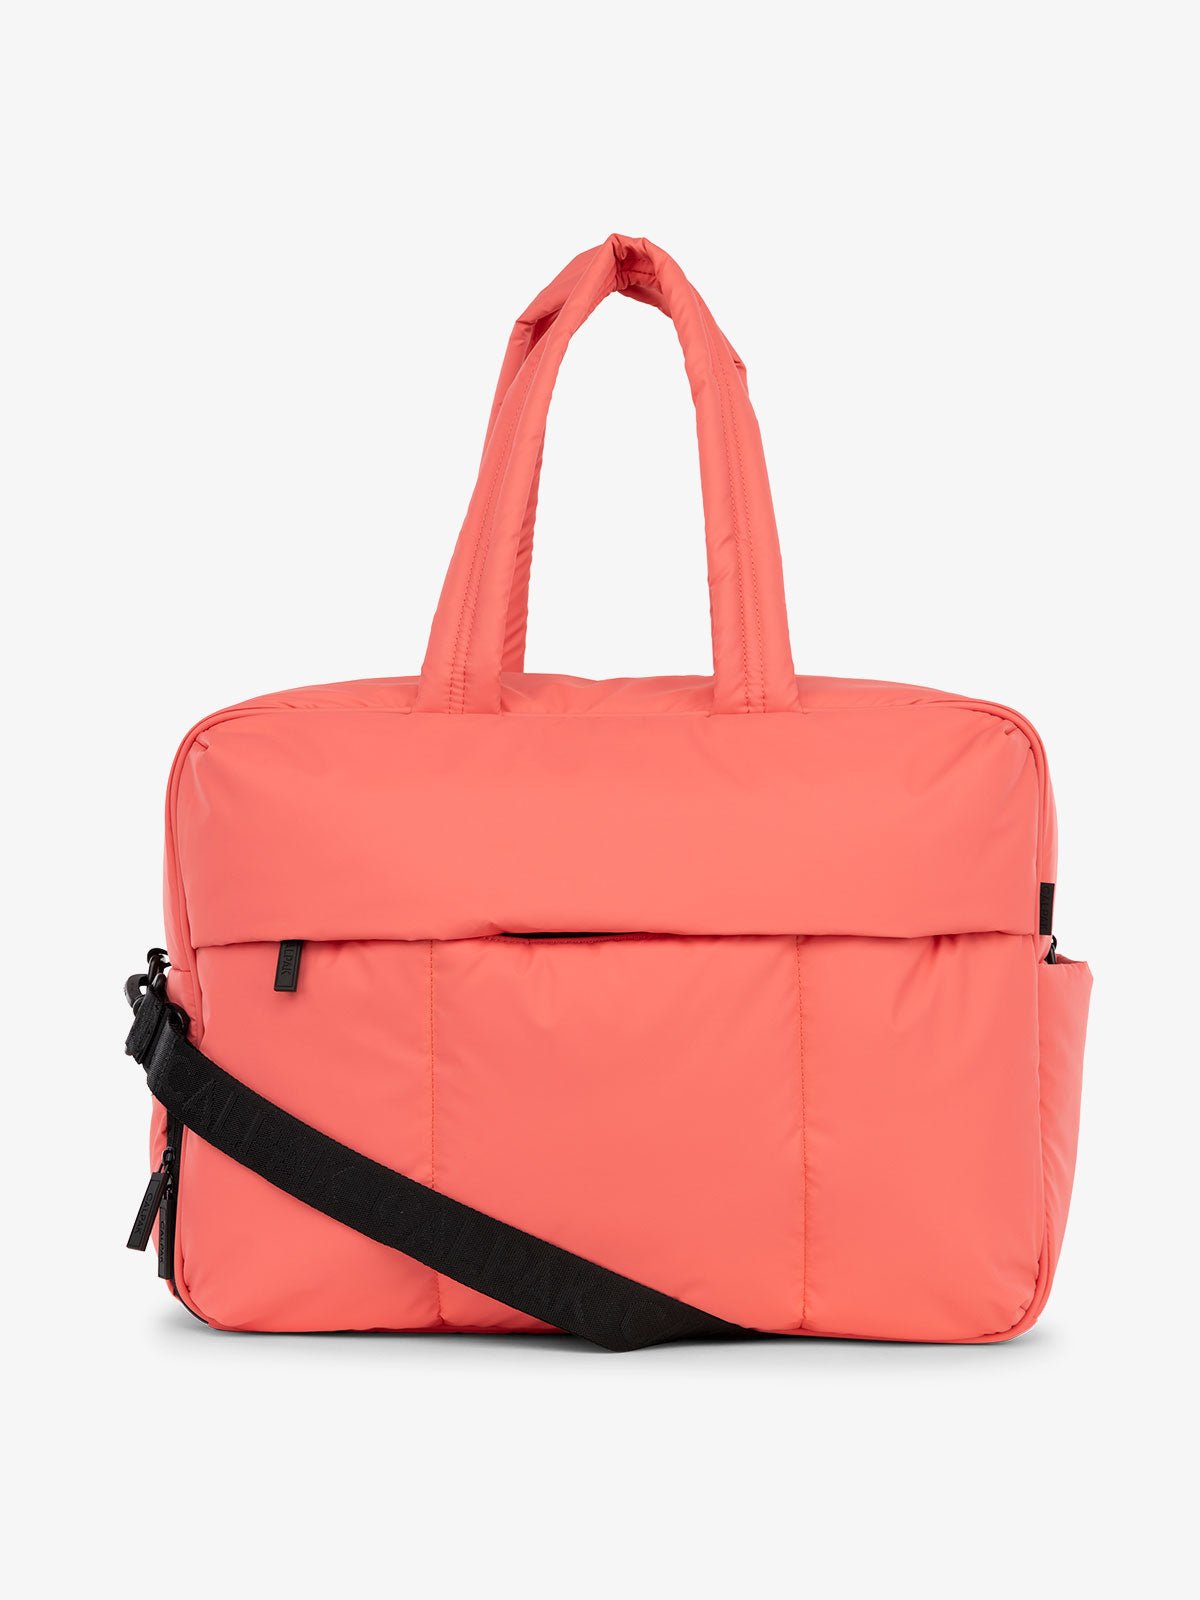 CALPAK Luka large duffle bag with detachable strap and zippered front pocket in watermelon